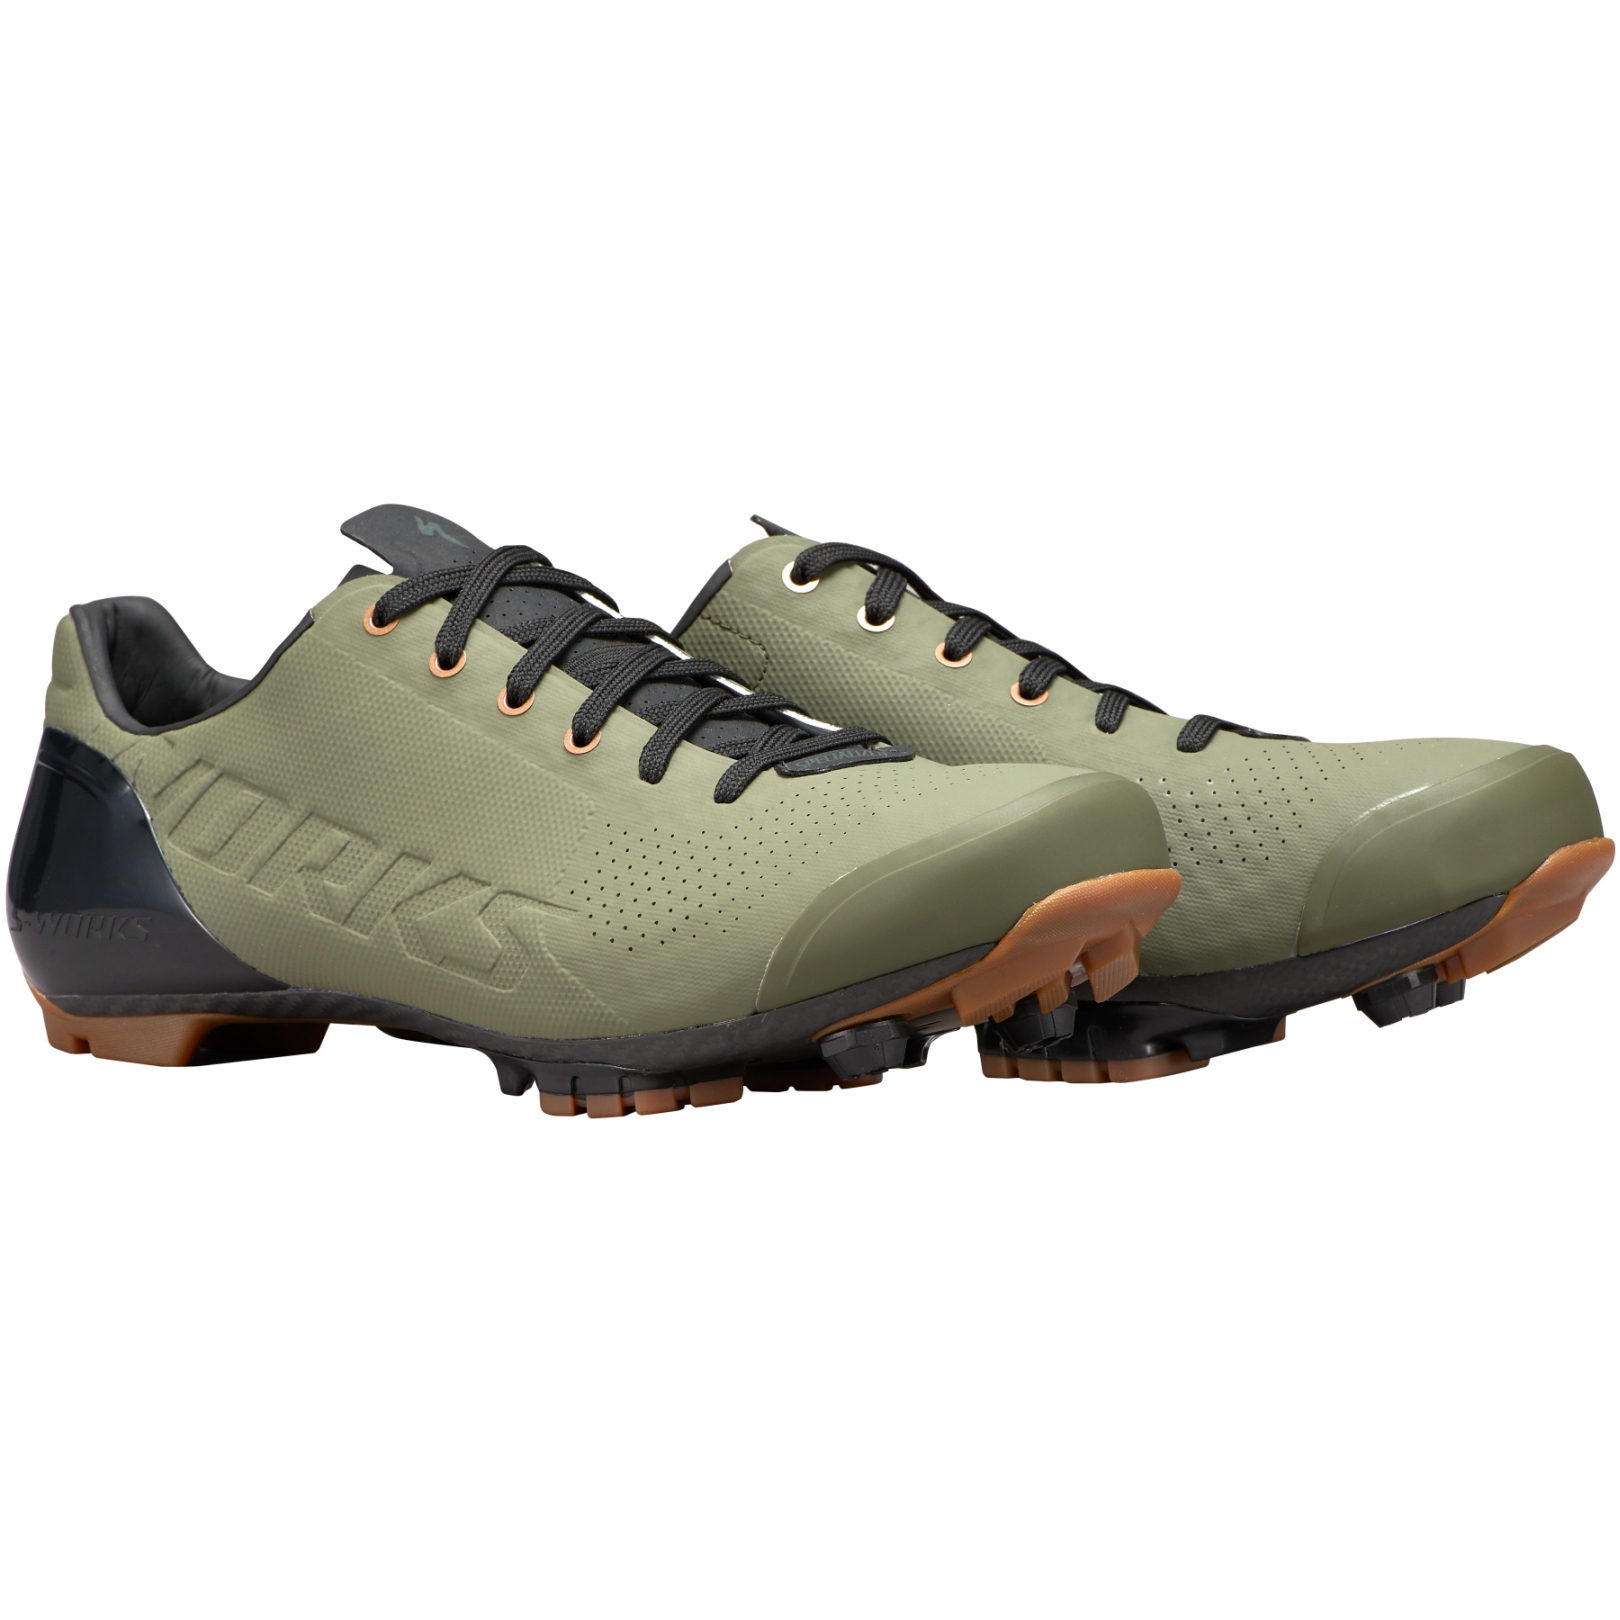 Image of Specialized S-Works Recon Lace Gravel Shoes - Oak Green